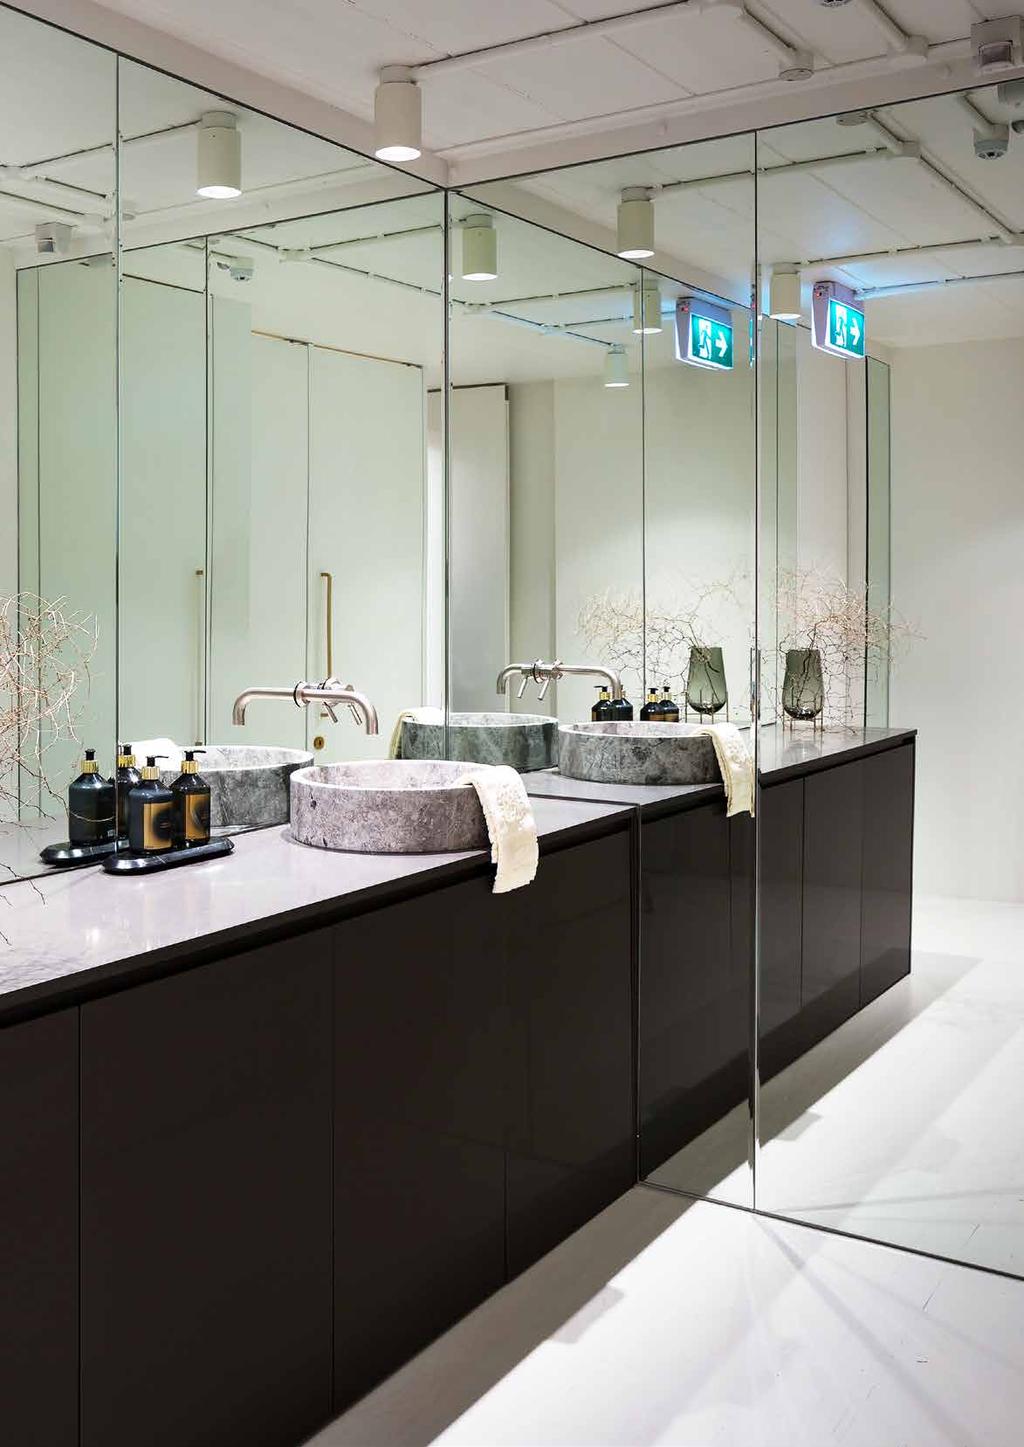 BATHROOM DETAILS With the demanding social lives of the office s occupants in mind, it was deemed altogether necessary that both a shower and a large bathroom area be included, where the staff could